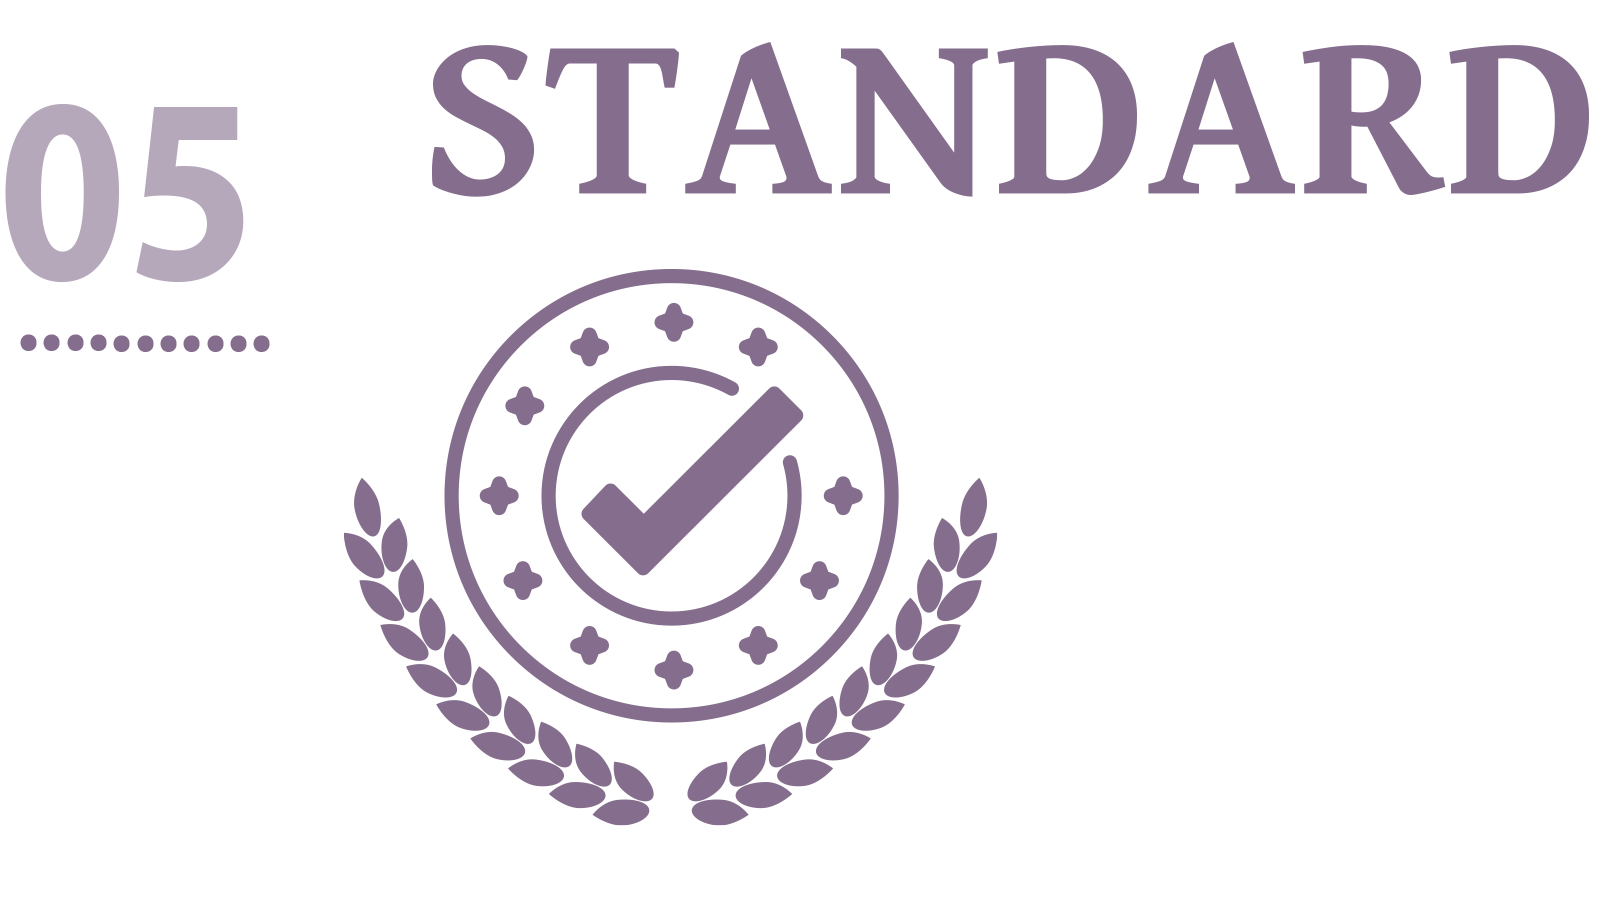 Global quality and <br> organic standards